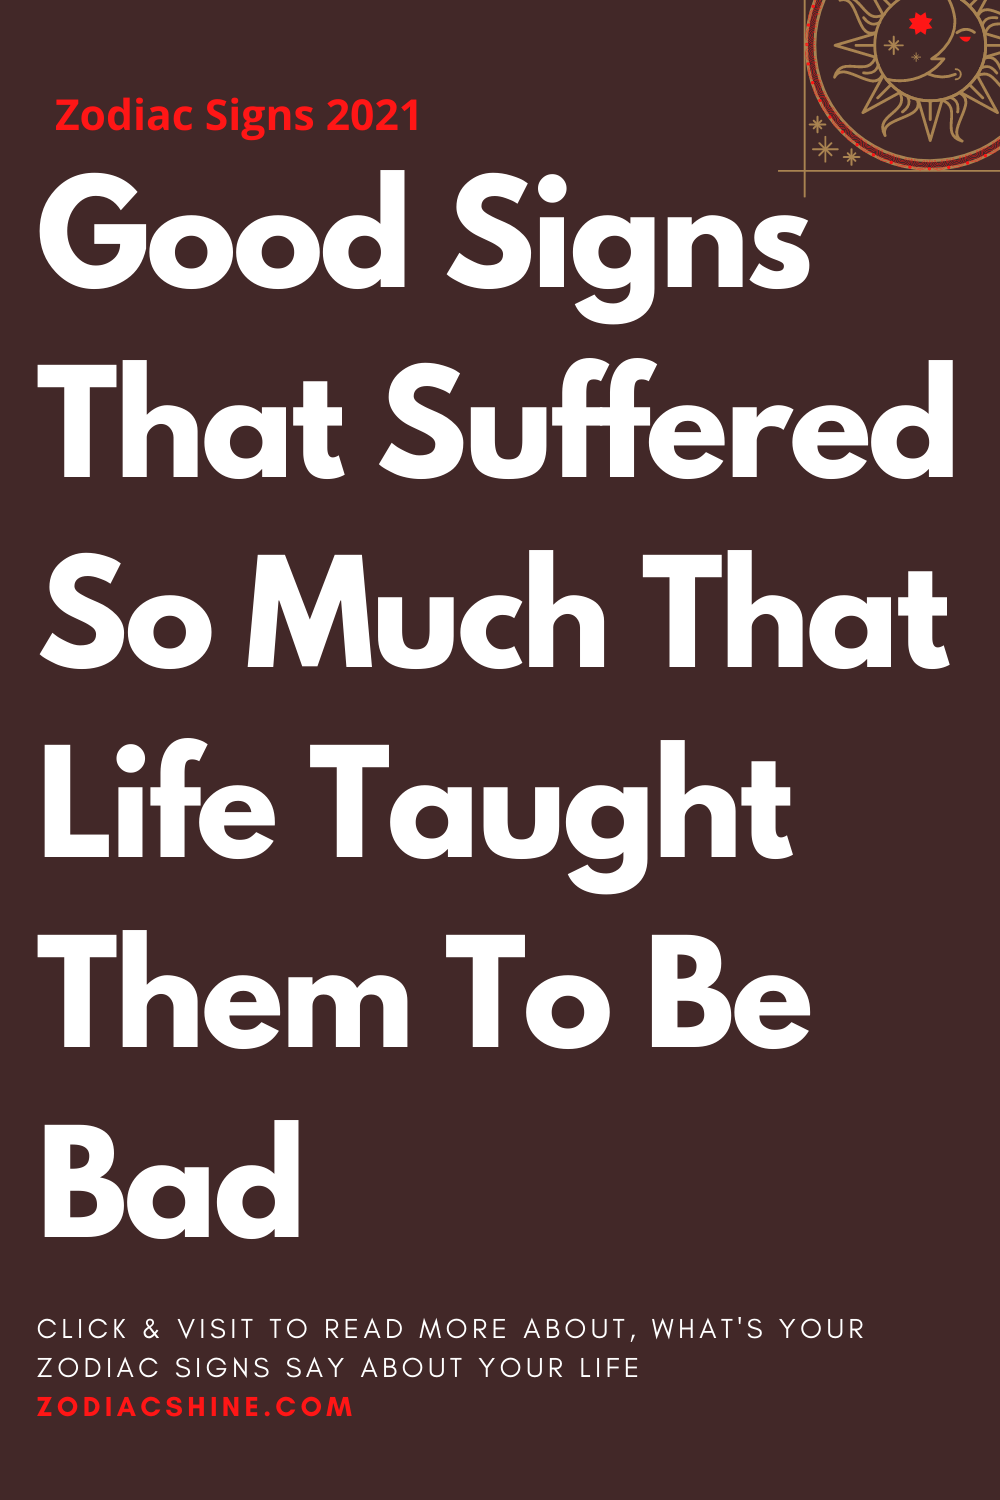 Good Signs That Suffered So Much That Life Taught Them To Be Bad